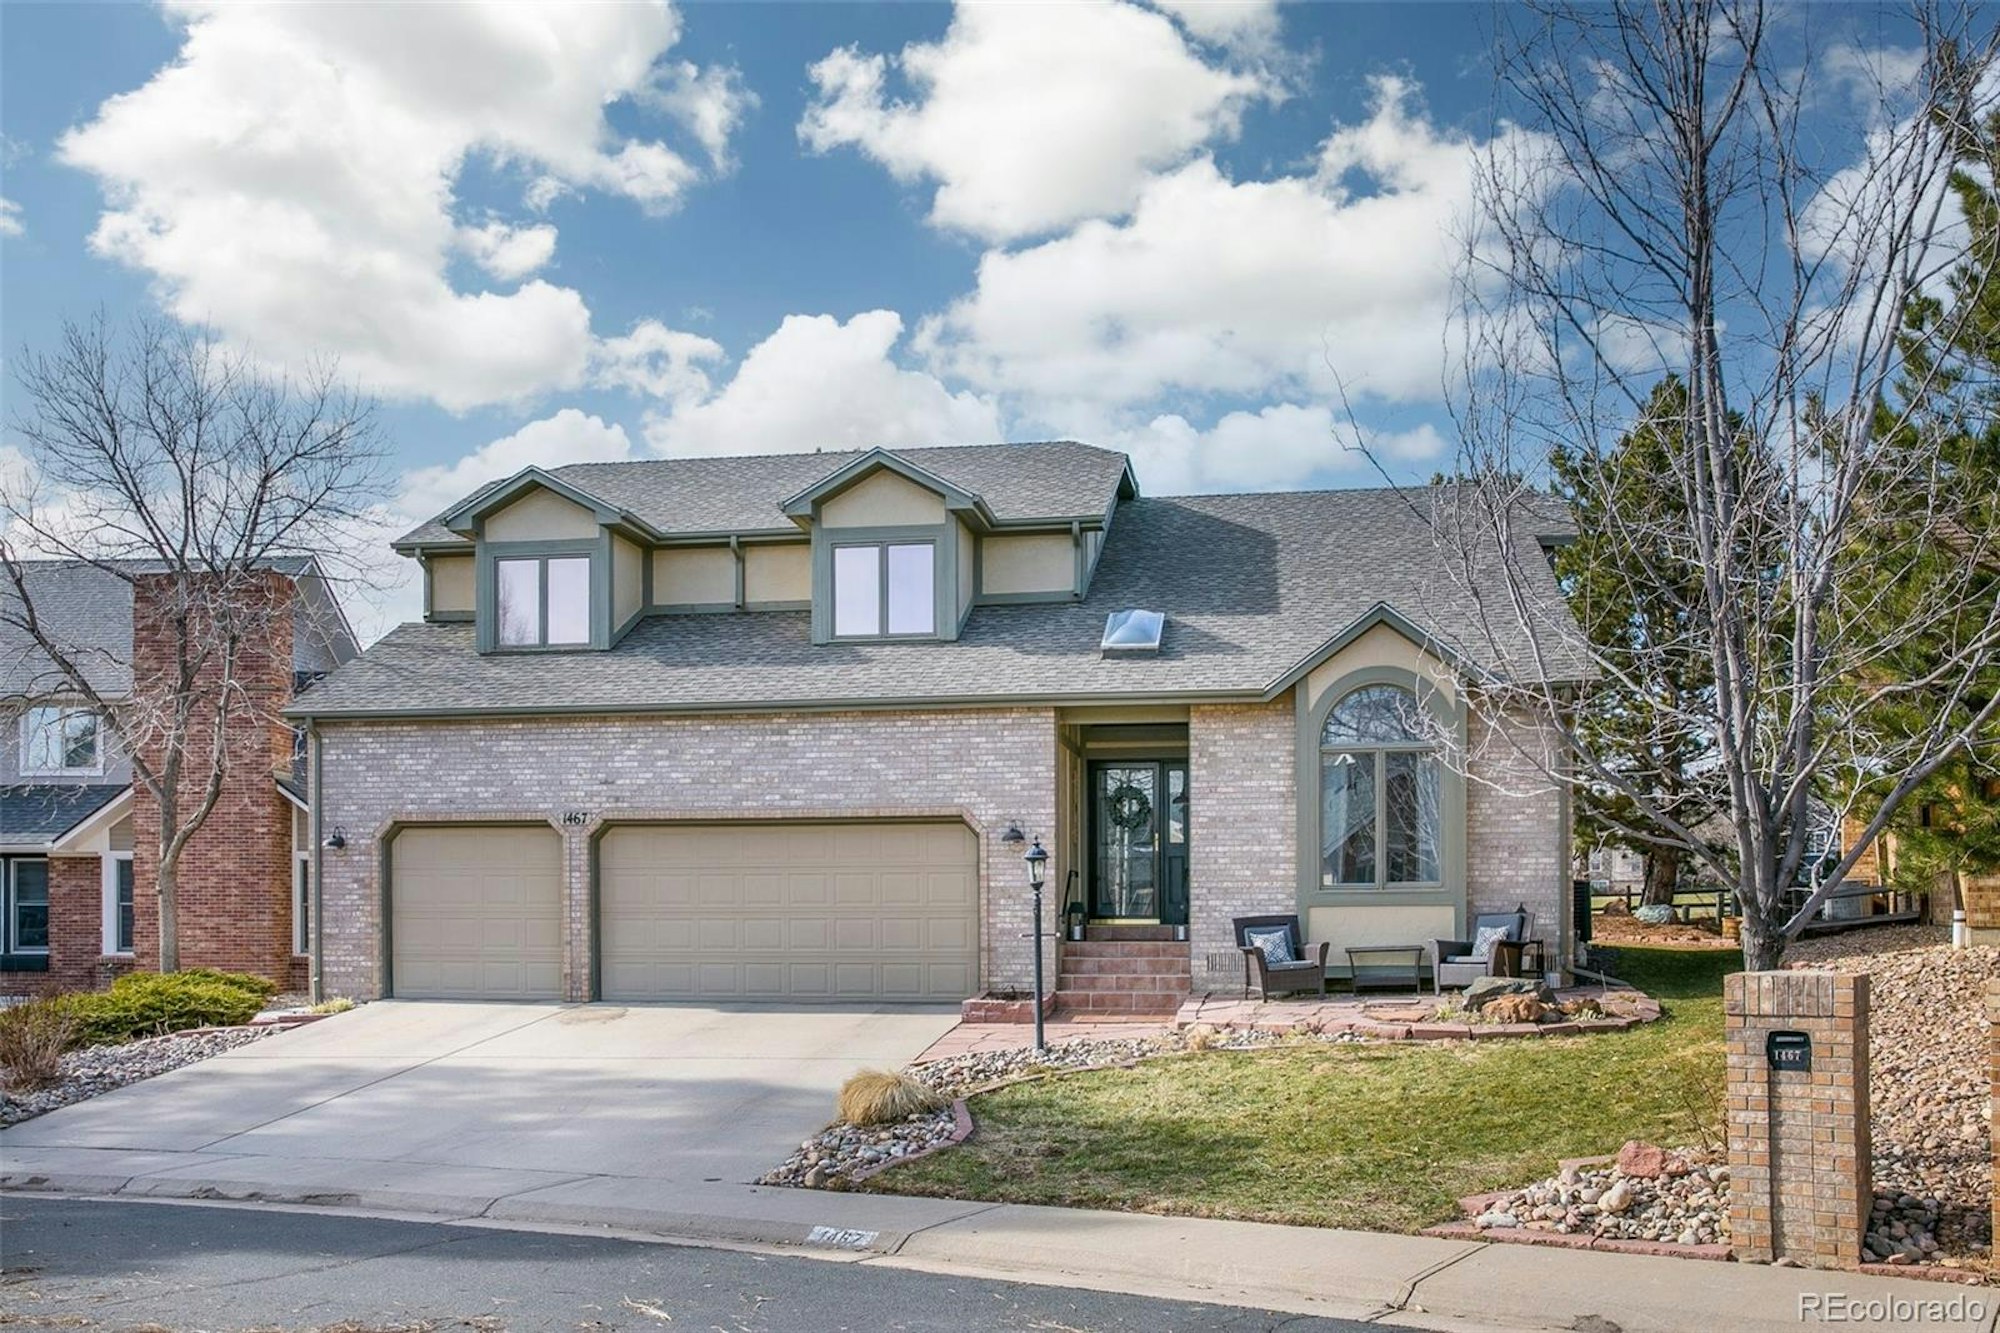 Photo 1 of 31 - 1467 Dunsford Way, Broomfield, CO 80020